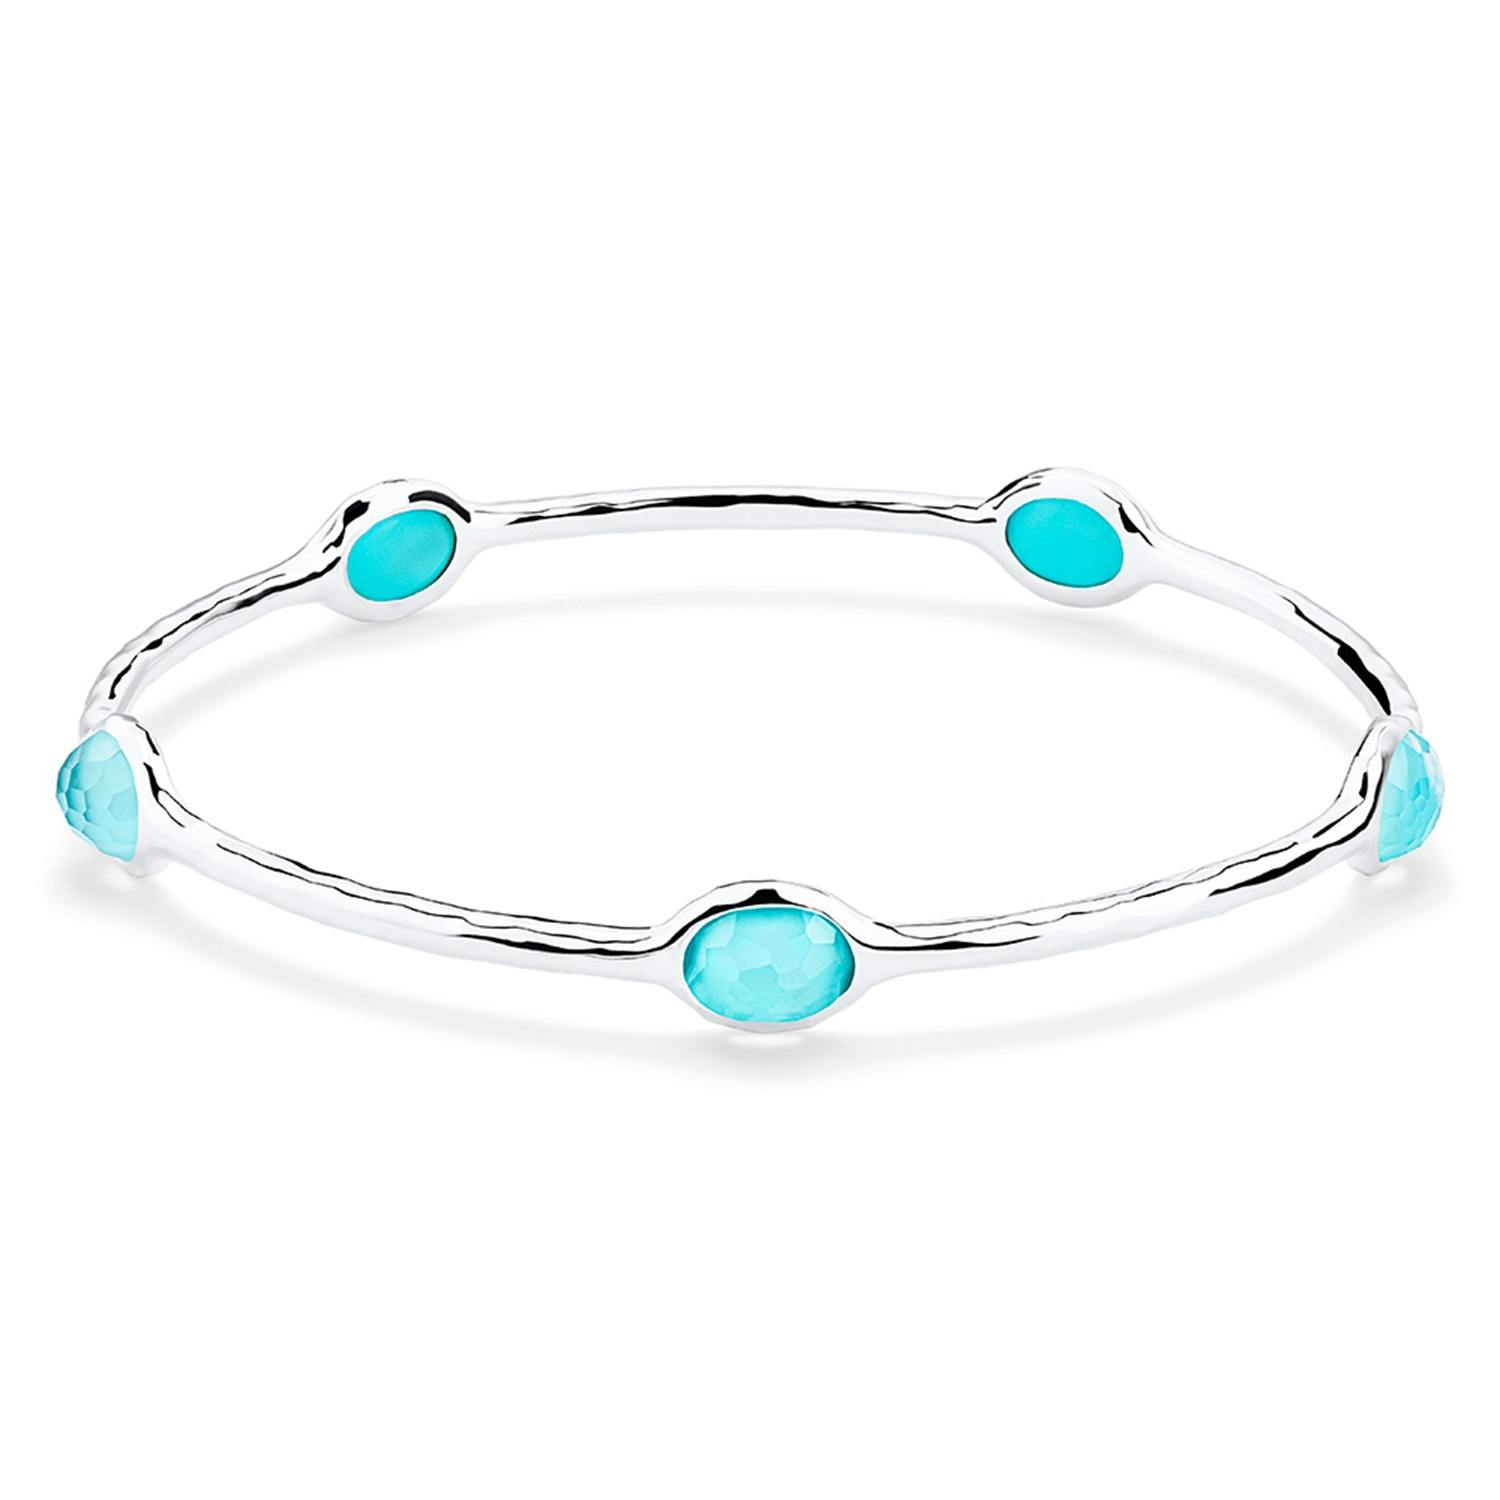 Ippolita Sterling Silver Rock Candy Turquoise & Clear Quartz Bangle